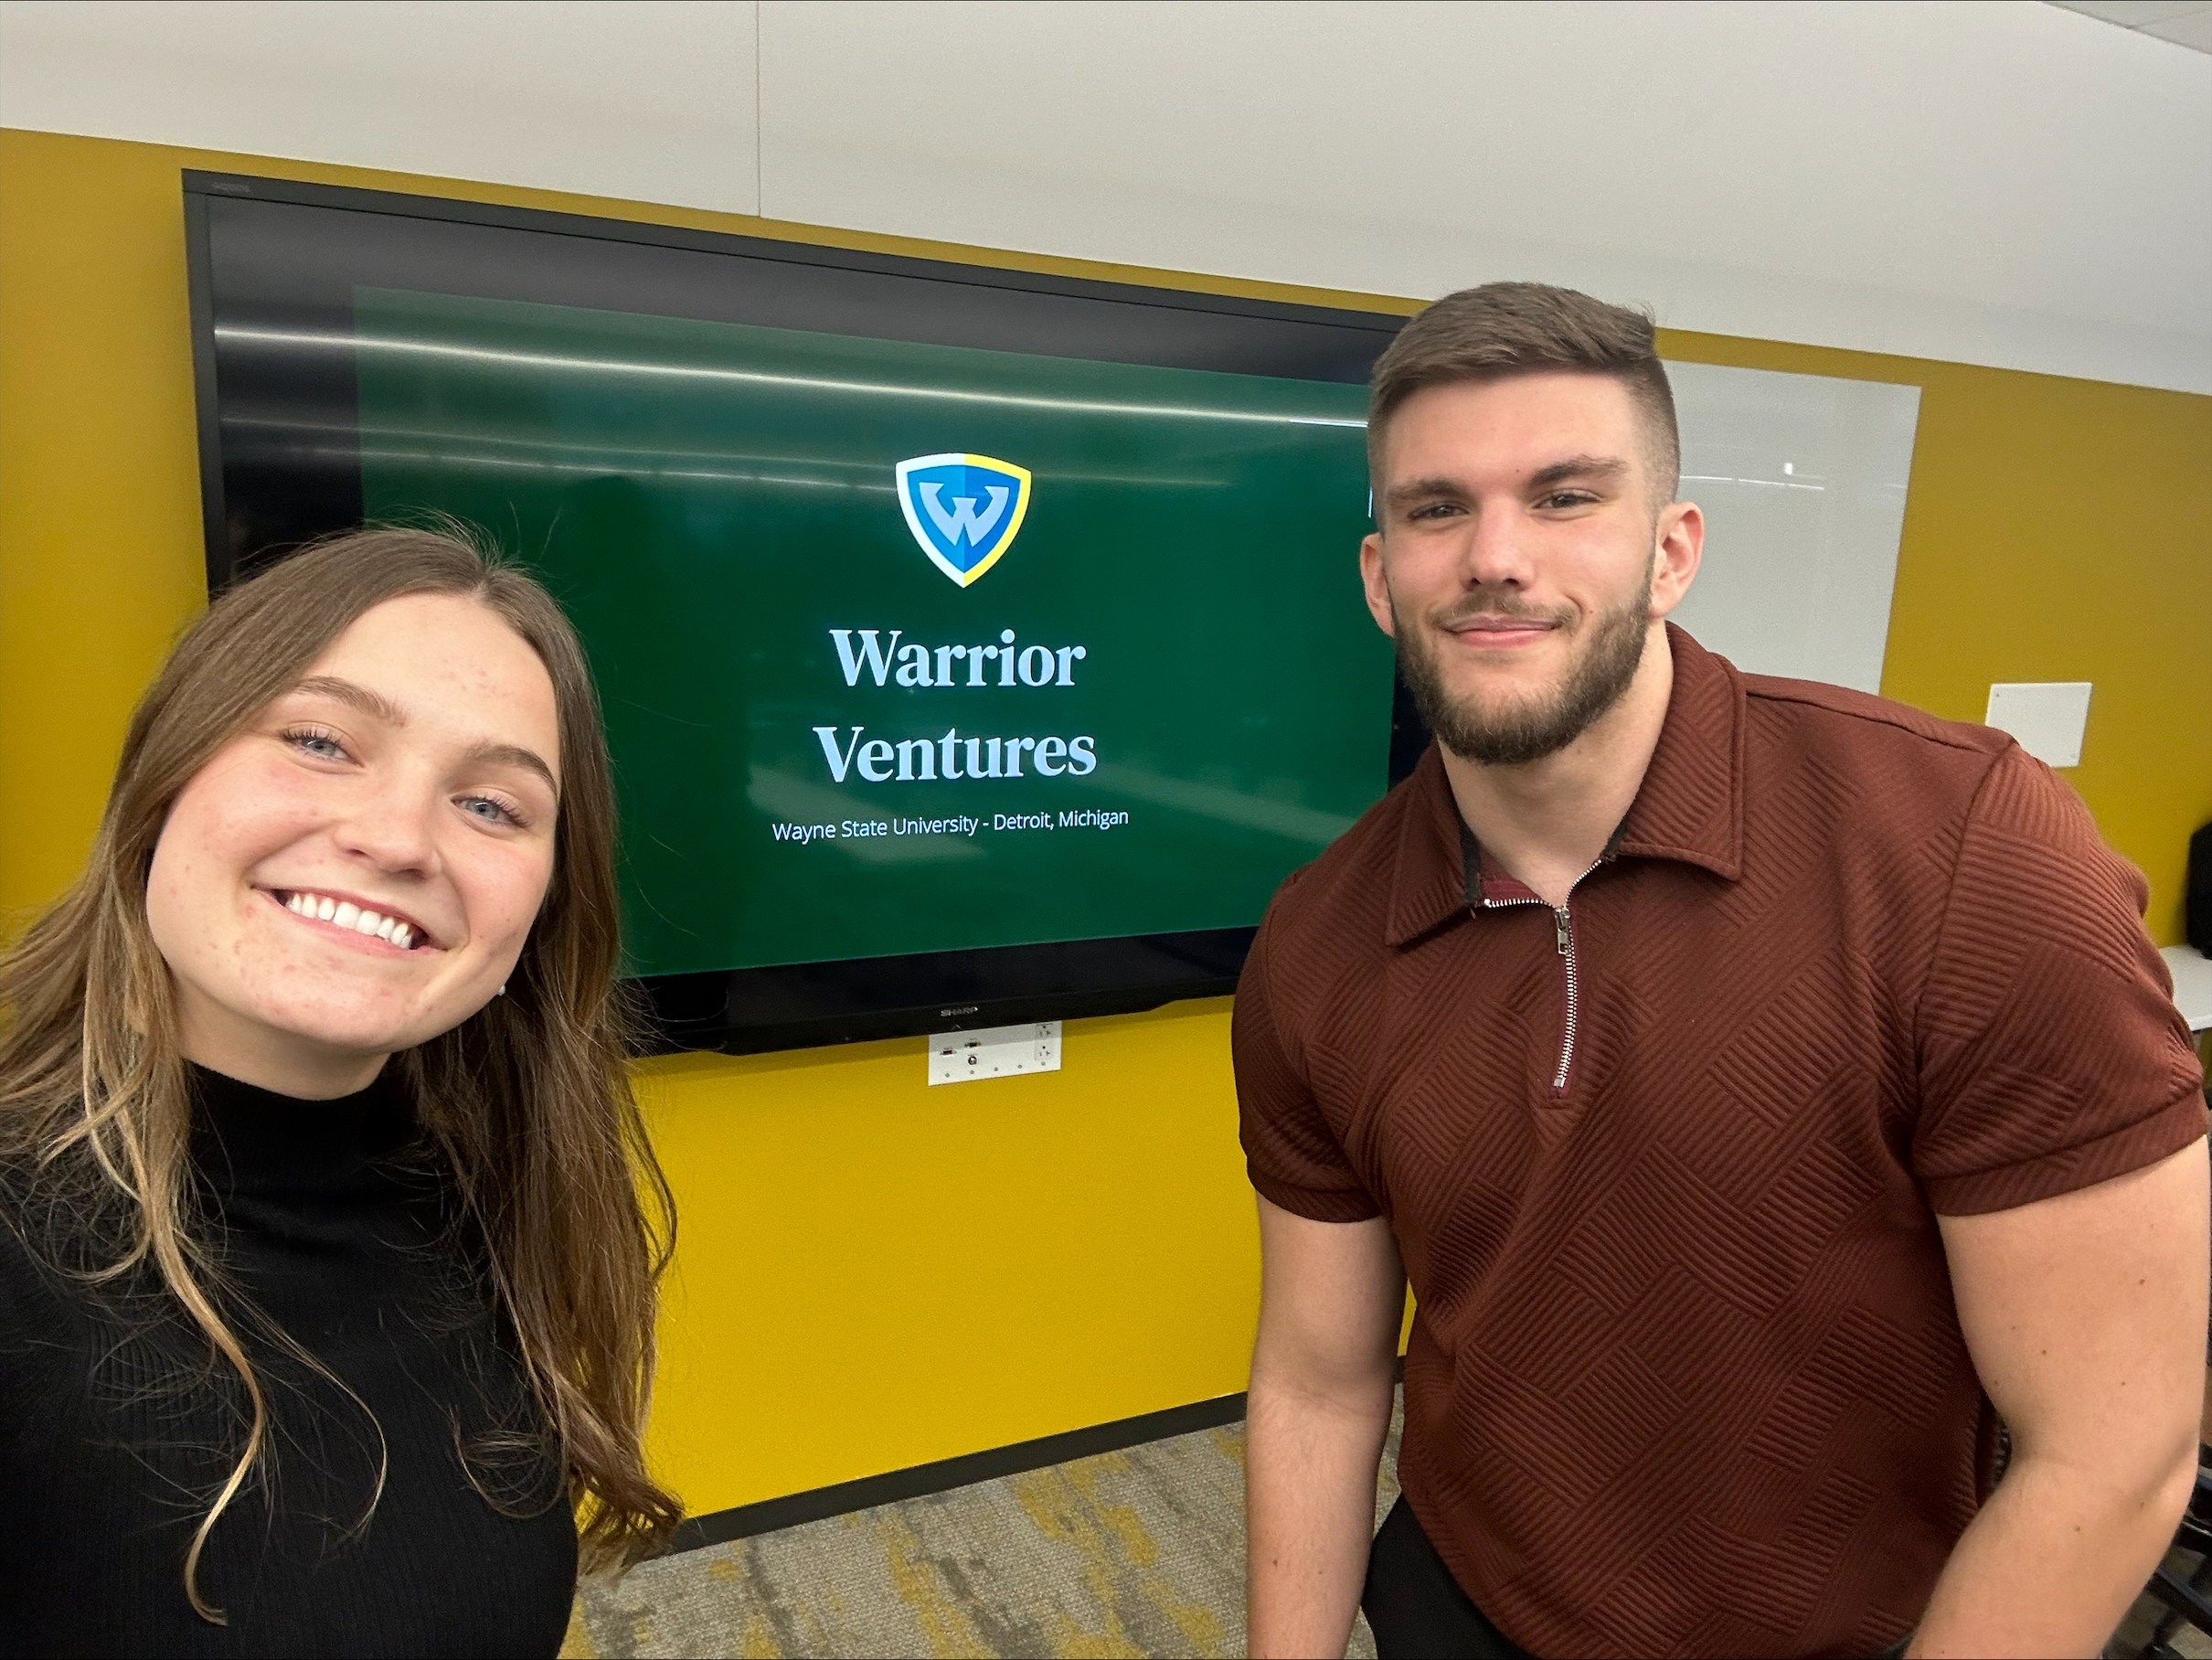 Man and woman smiling next to a screen that reads Warrior Ventures